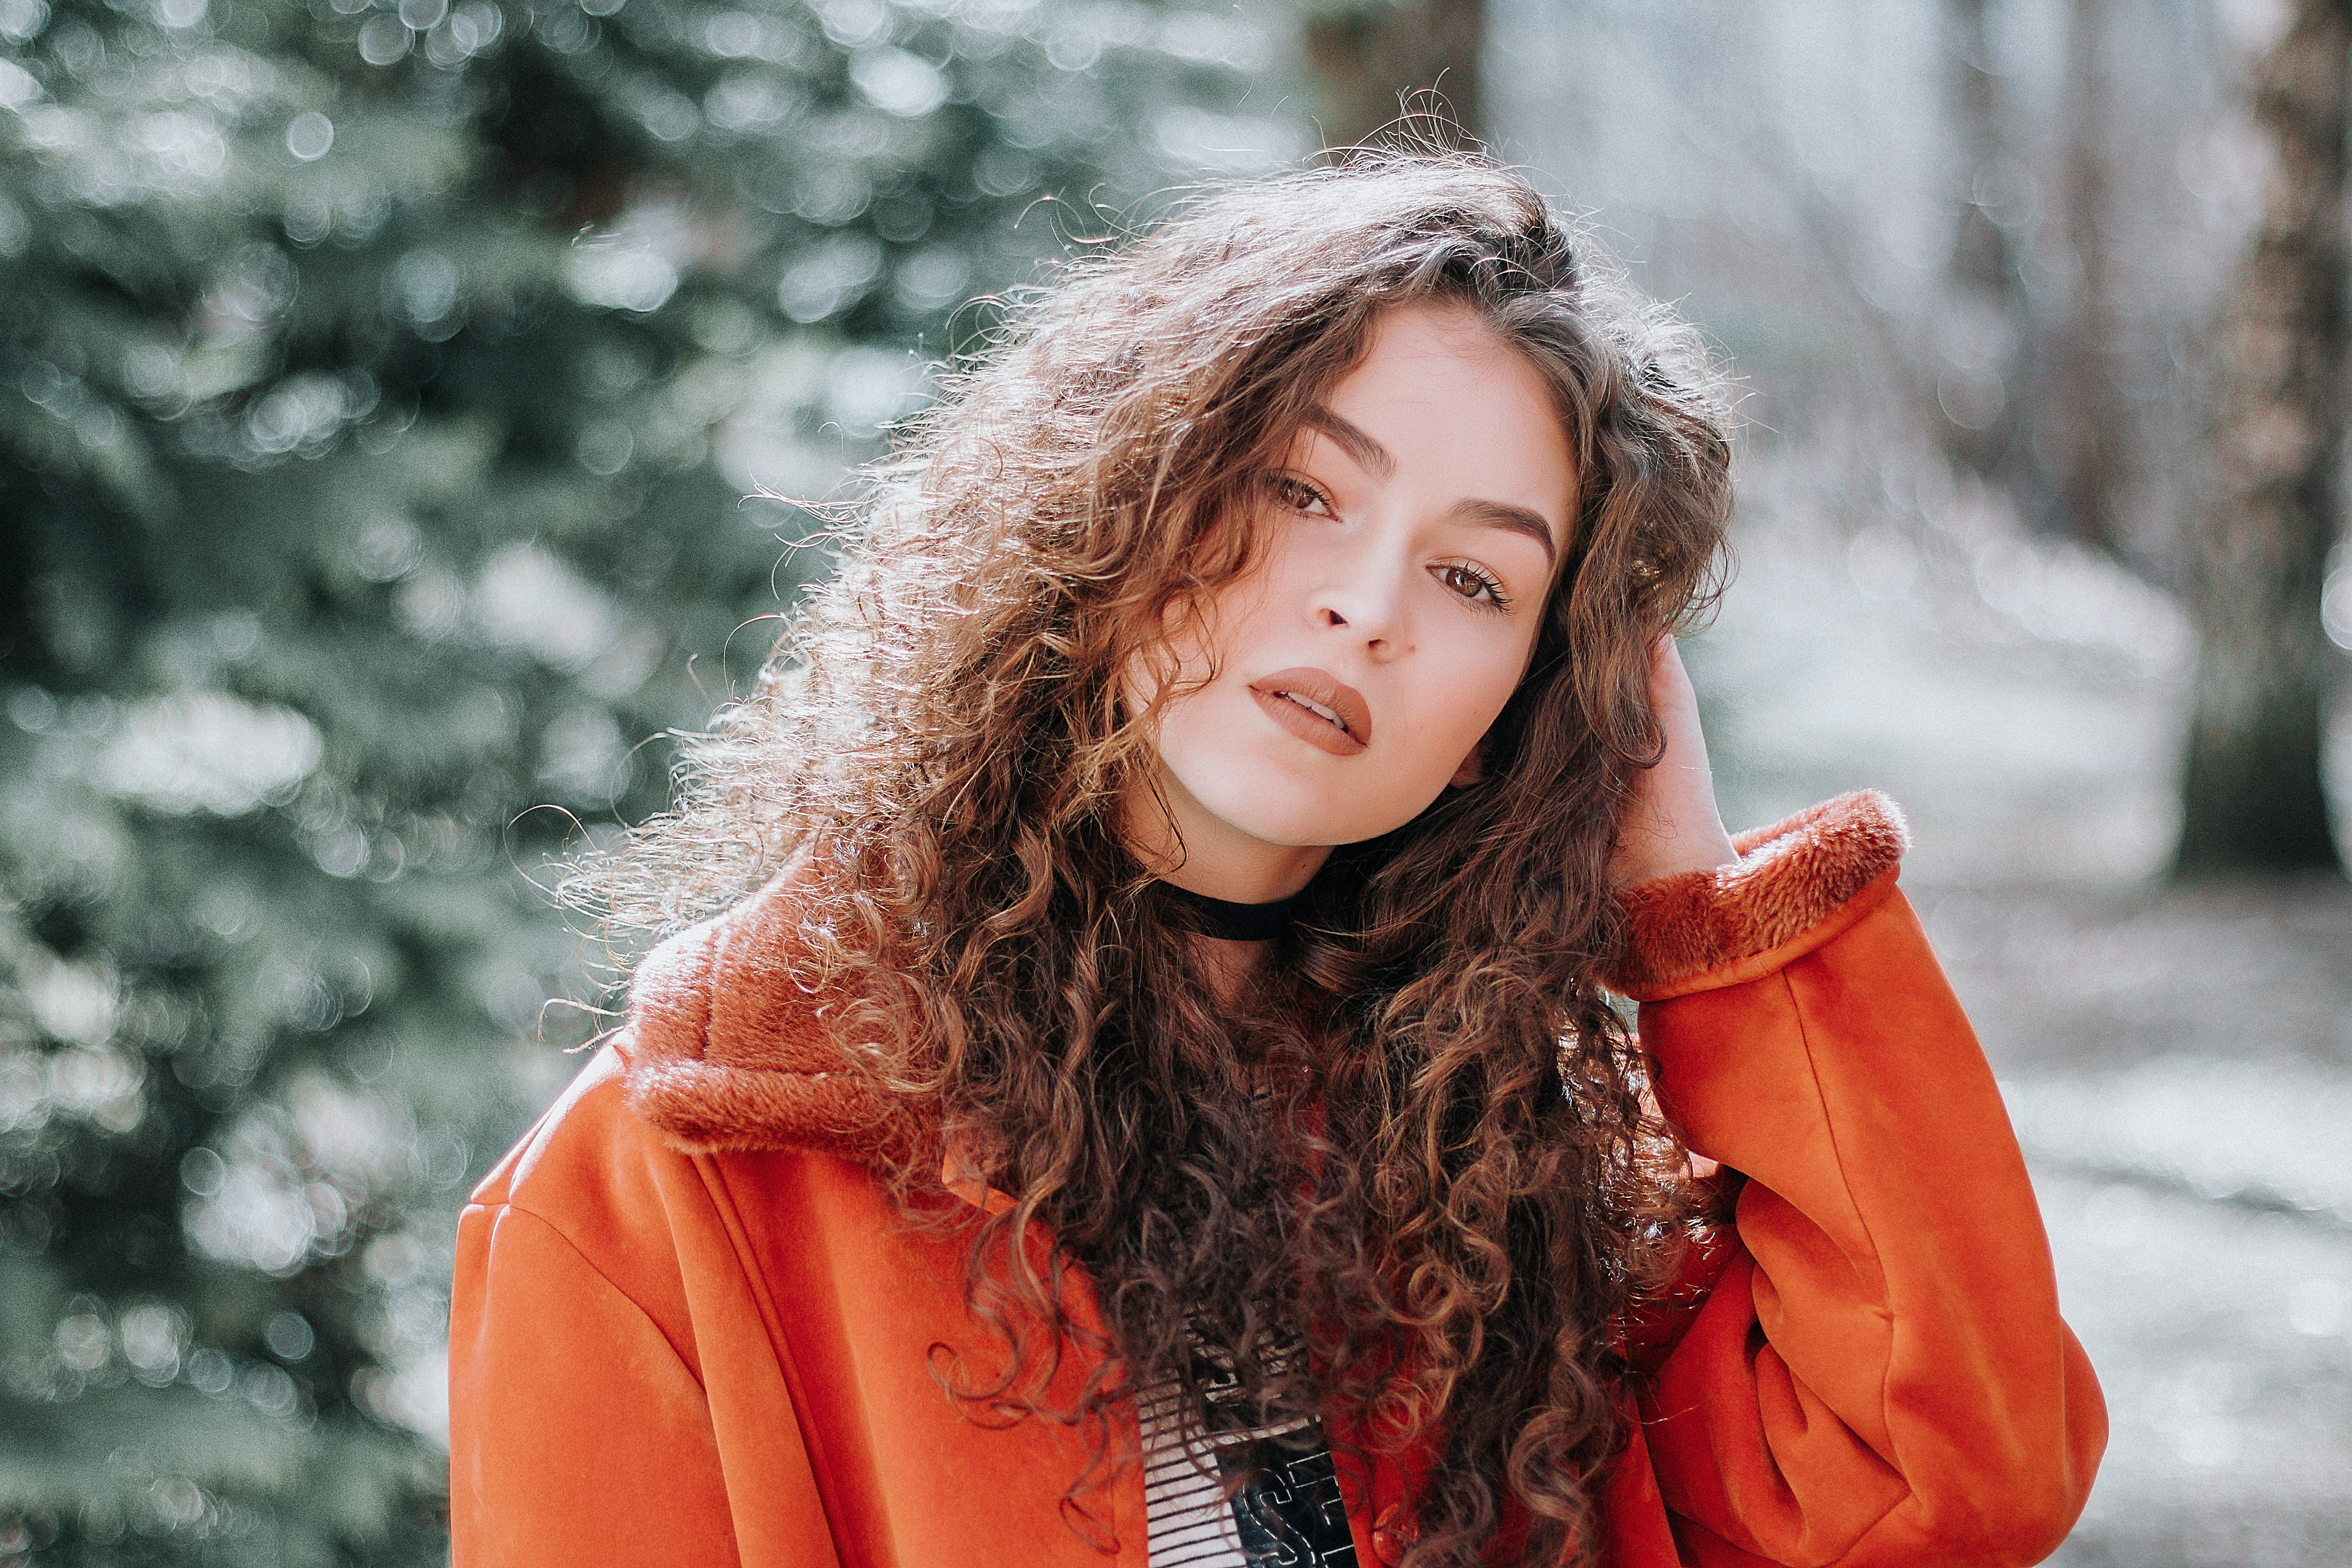 Women Curly Hair Fashion Model Outdoors Seasons Face Portrait Makeup Orange Jacket Looking At Viewer 5120x3413